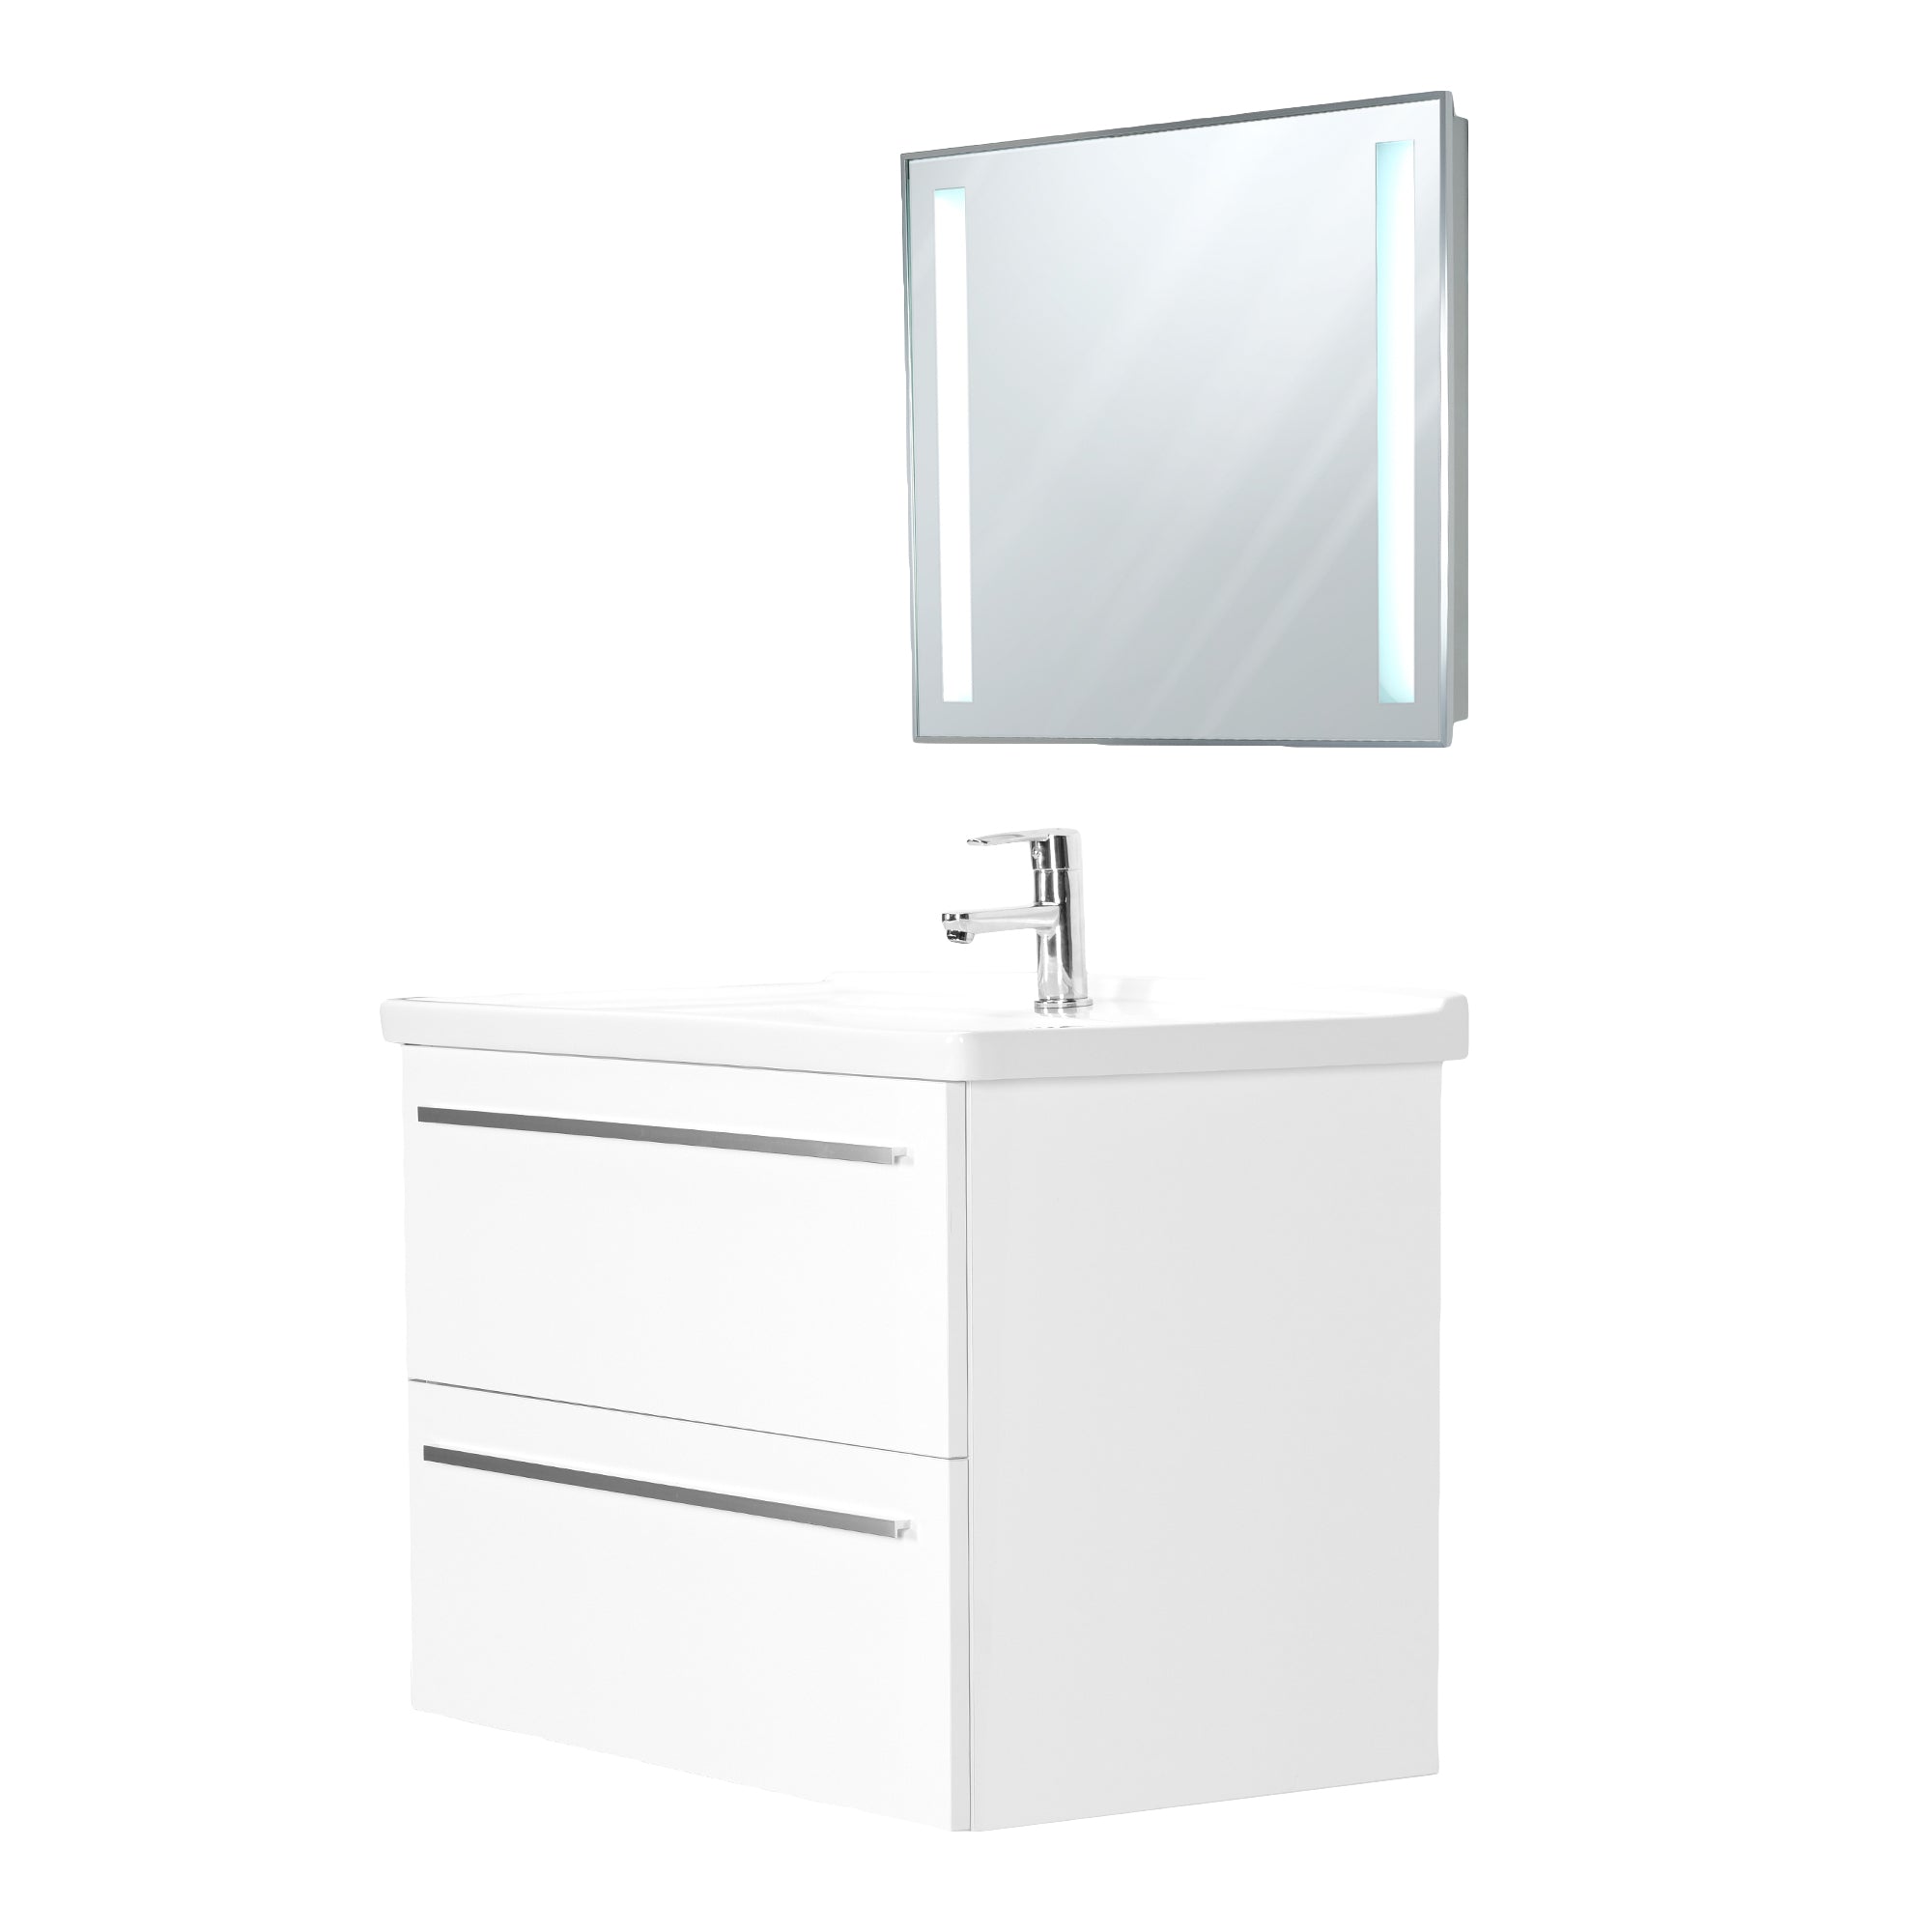 FIORE 32 INCH MODERN WALL MOUNT VANITY AND SINK COMBO - GLOSSY WHITE